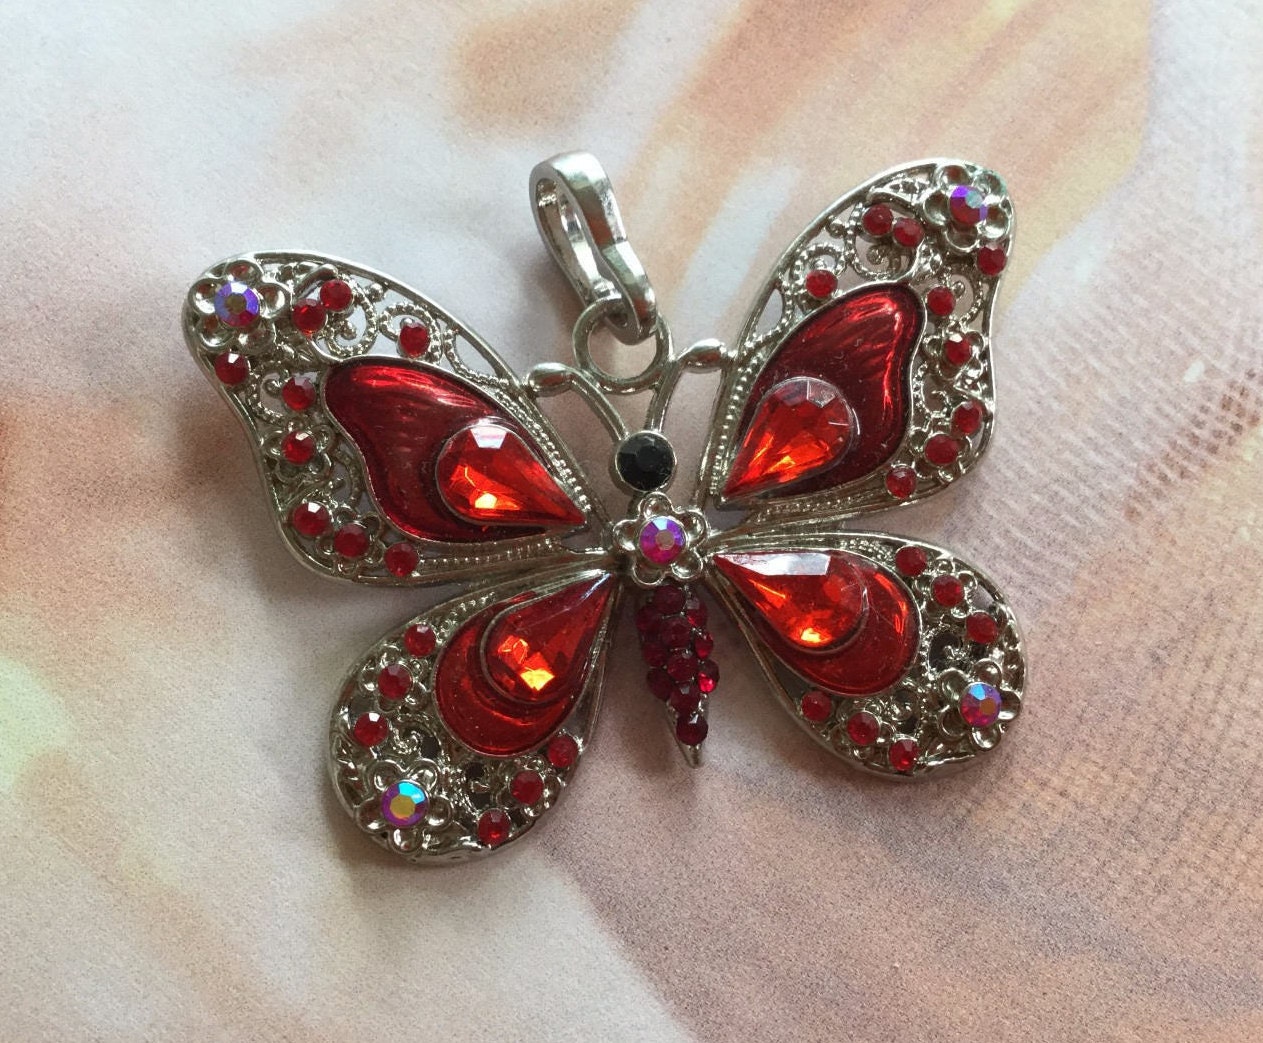 Butterfly Rhinestone Necklace | Pendant Necklace | Jewelry - New Crystal  Pendant - Aliexpress